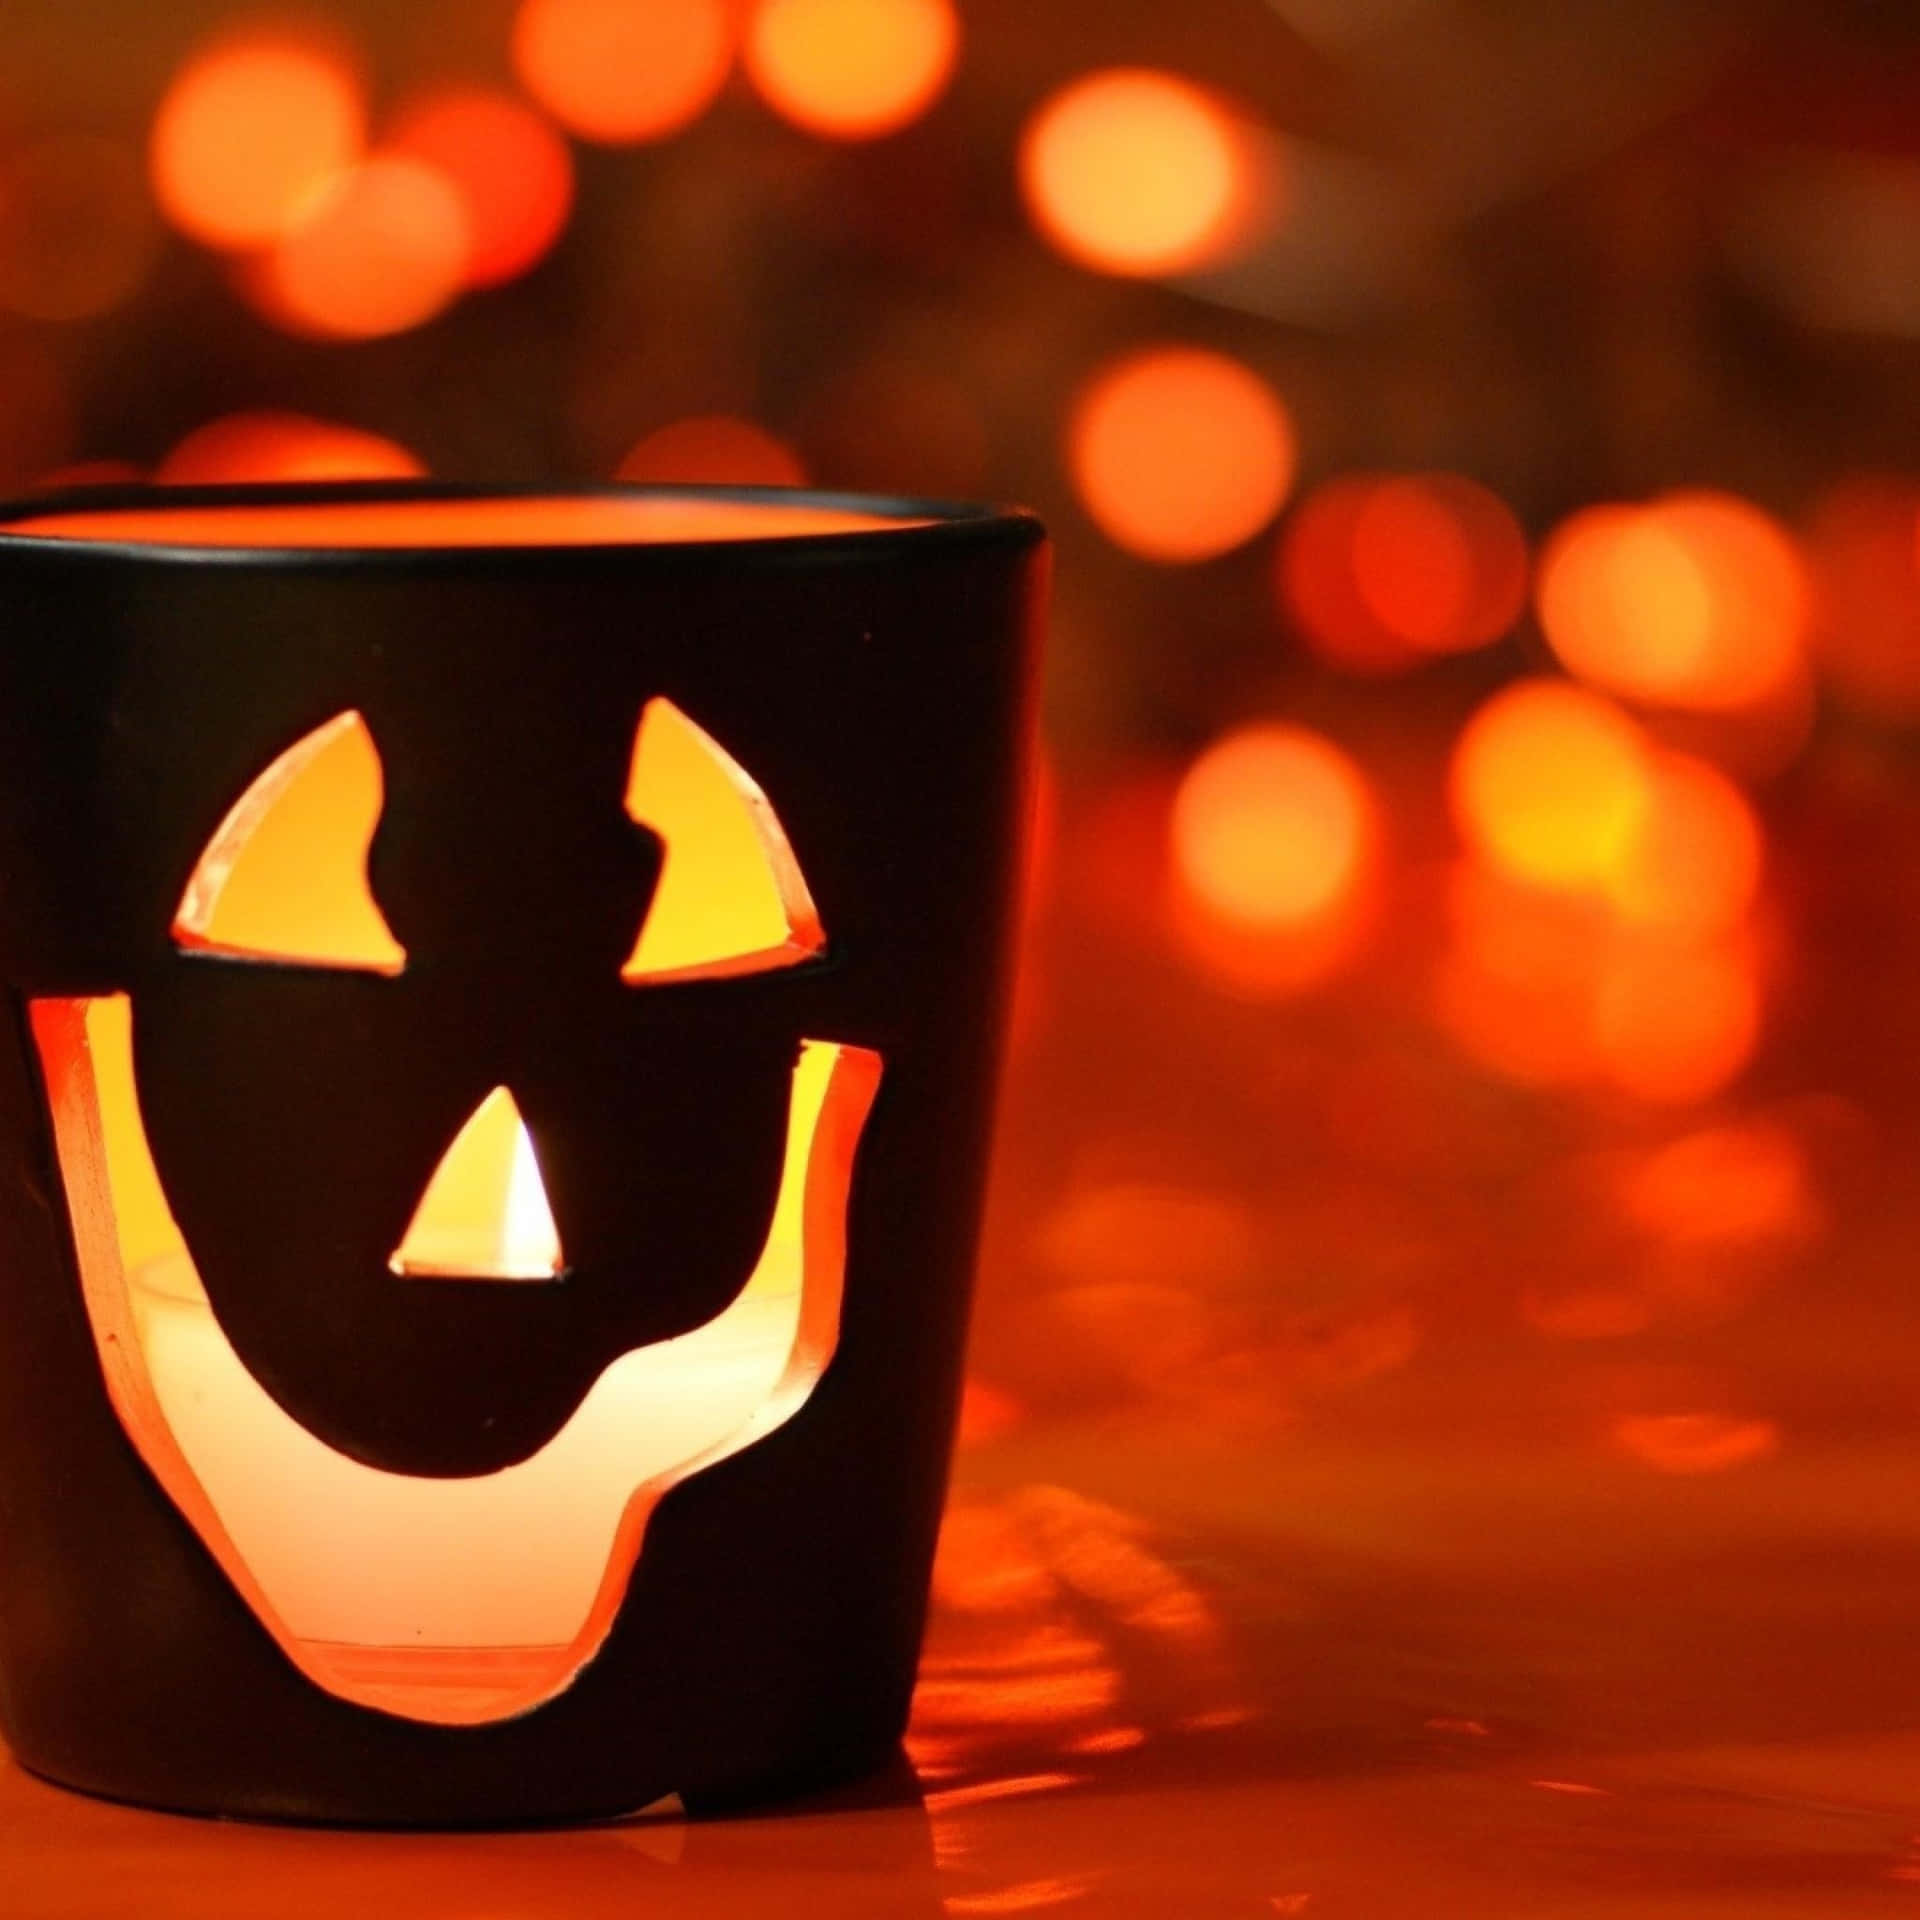 A Black Candle With A Jack O Lantern Face On It